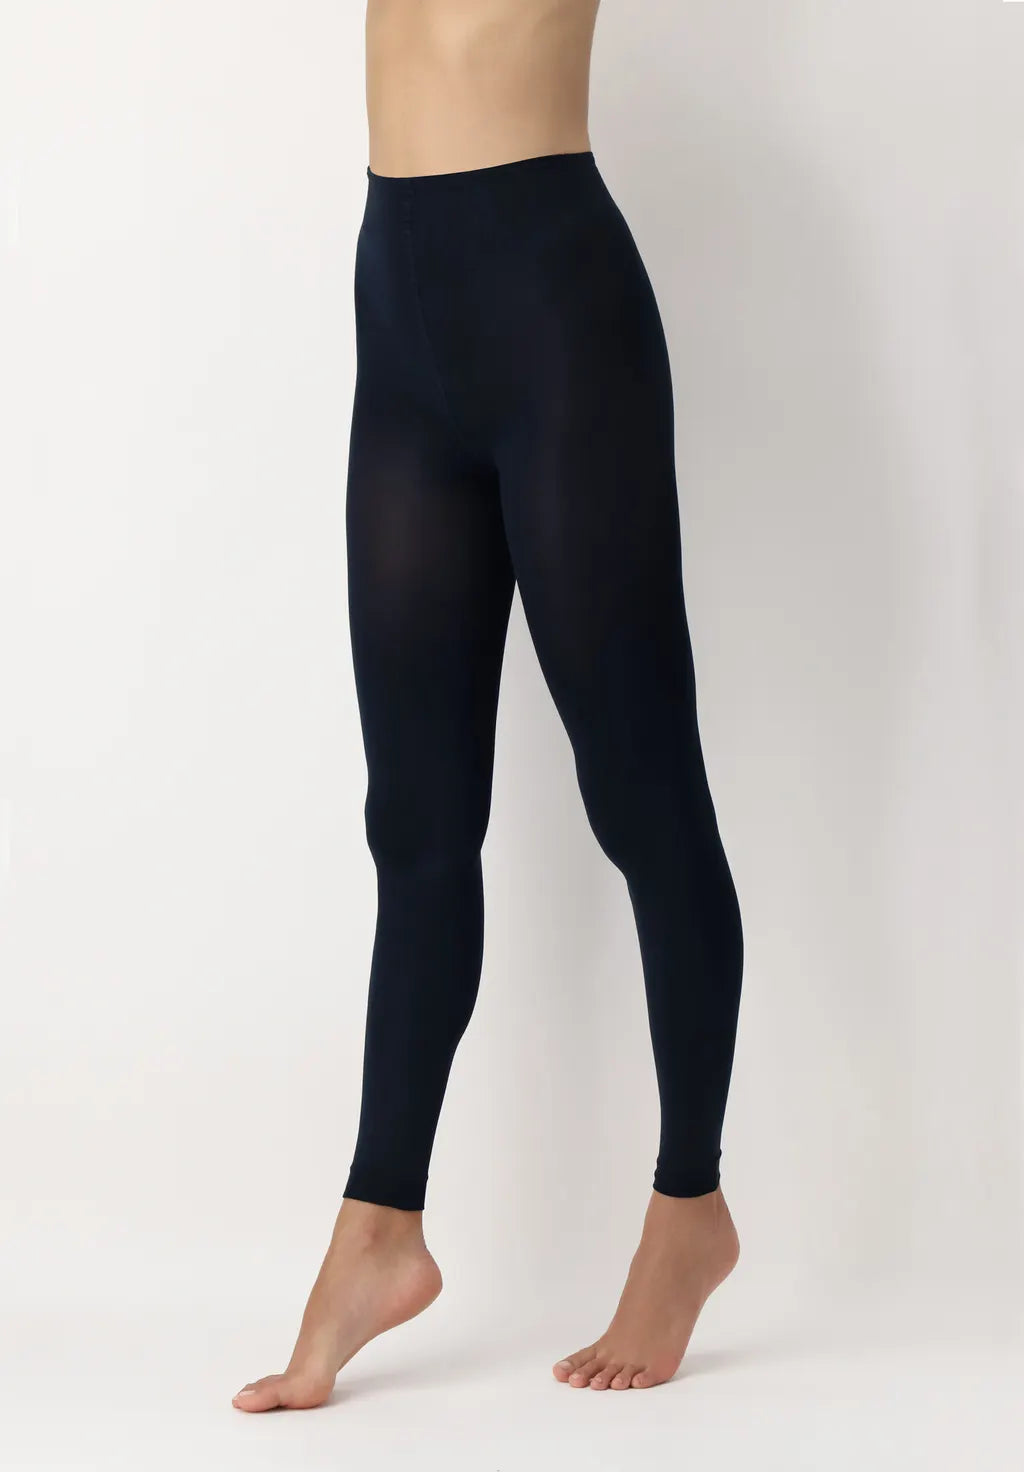 OroblÌ_ All Colors 120 Leggings - Navy blue ultra opaque soft matte footless tights with flat seams, gusset and deep waist band.